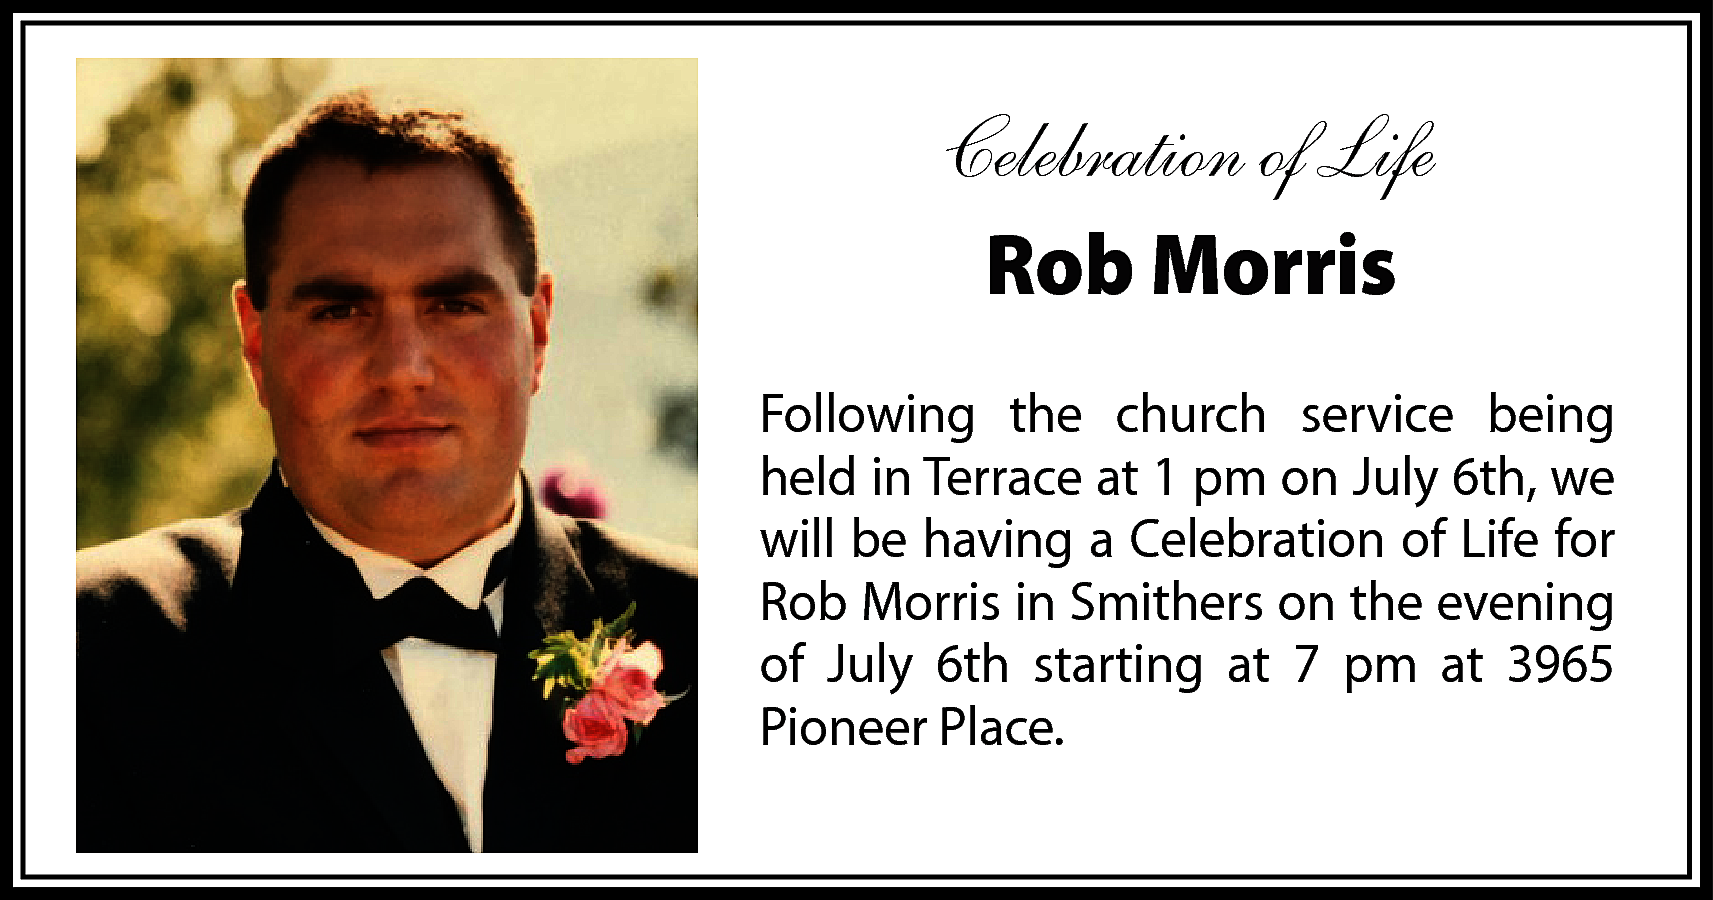 Celebration of Life <br>Rob Morris  Celebration of Life  Rob Morris  Following the church service being  held in Terrace at 1 pm on July 6th, we  will be having a Celebration of Life for  Rob Morris in Smithers on the evening  of July 6th starting at 7 pm at 3965  Pioneer Place.    